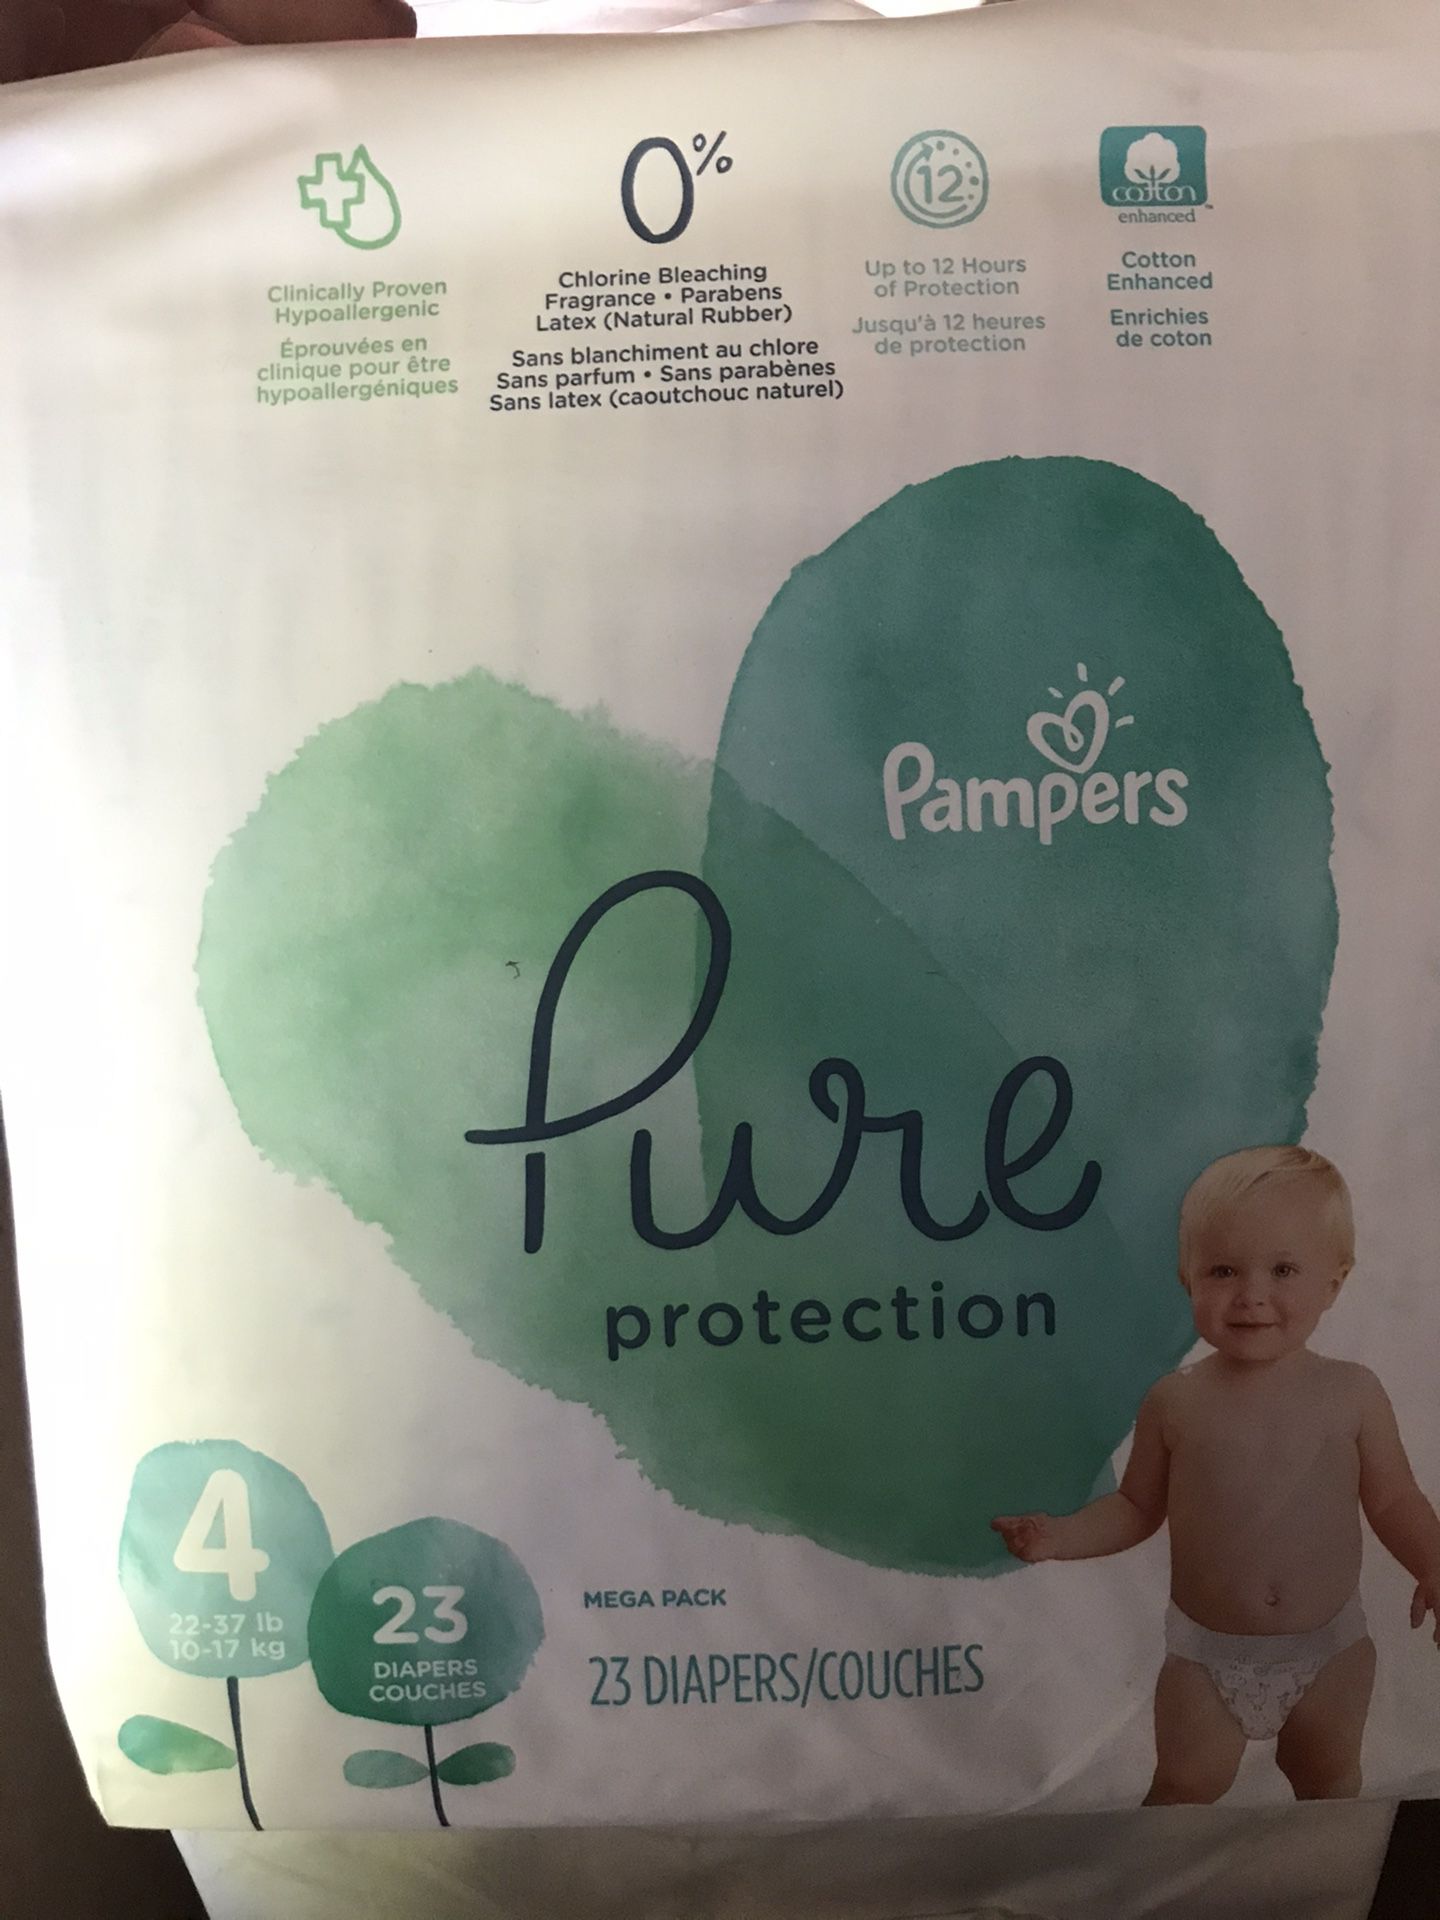 Pampers diaper and wipes